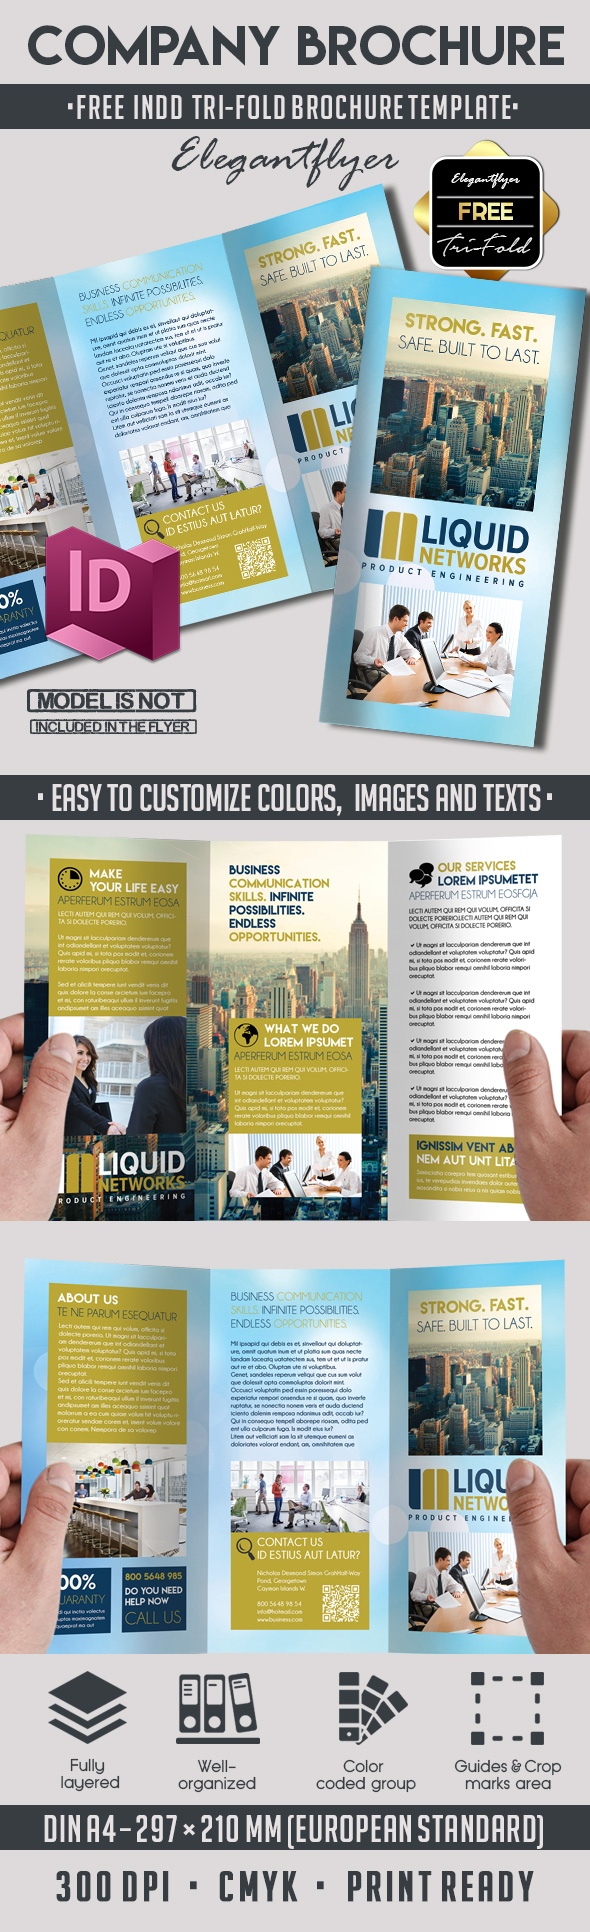 5 Powerful Free Adobe Indesign Brochures Templates! | With Regard To Adobe Indesign Tri Fold Brochure Template